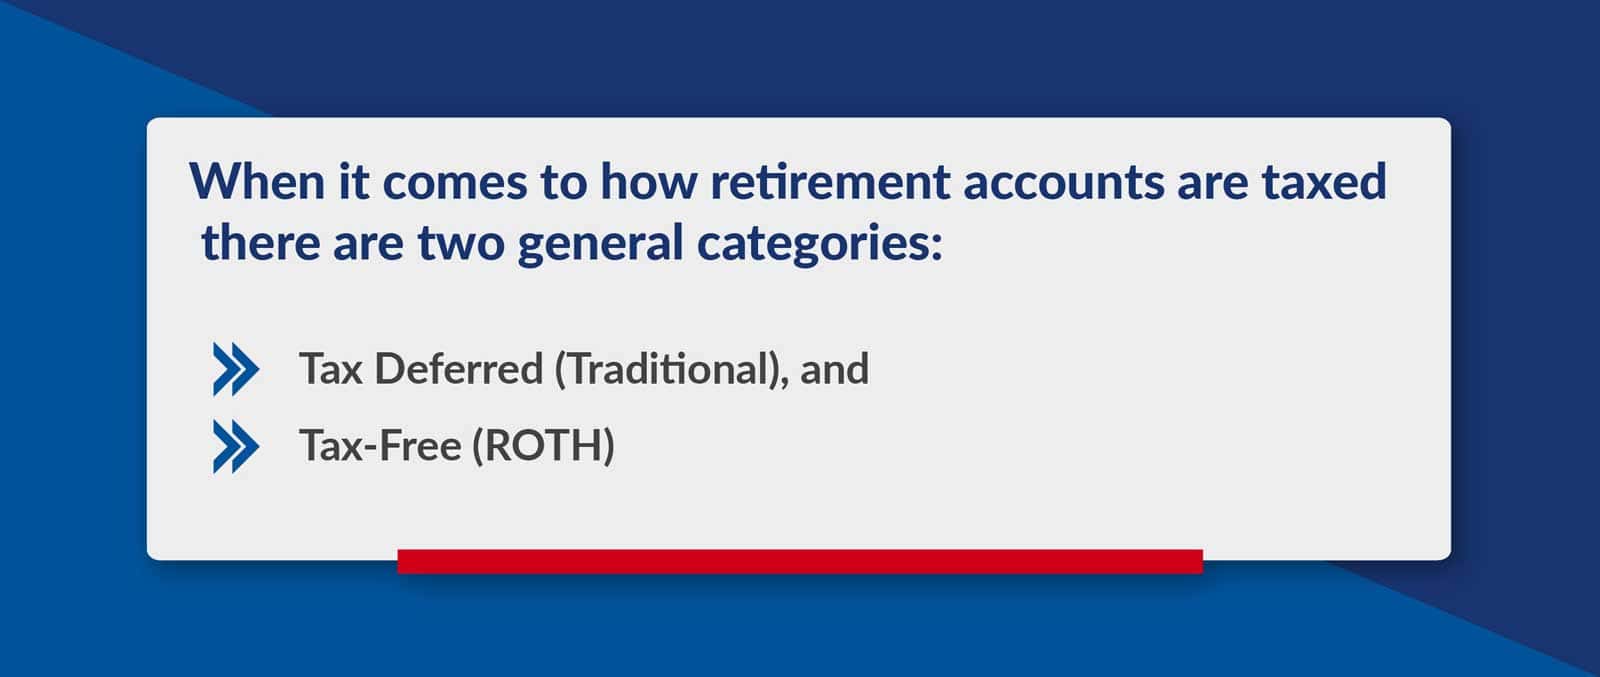 Categories for Taxing Retirement Accounts